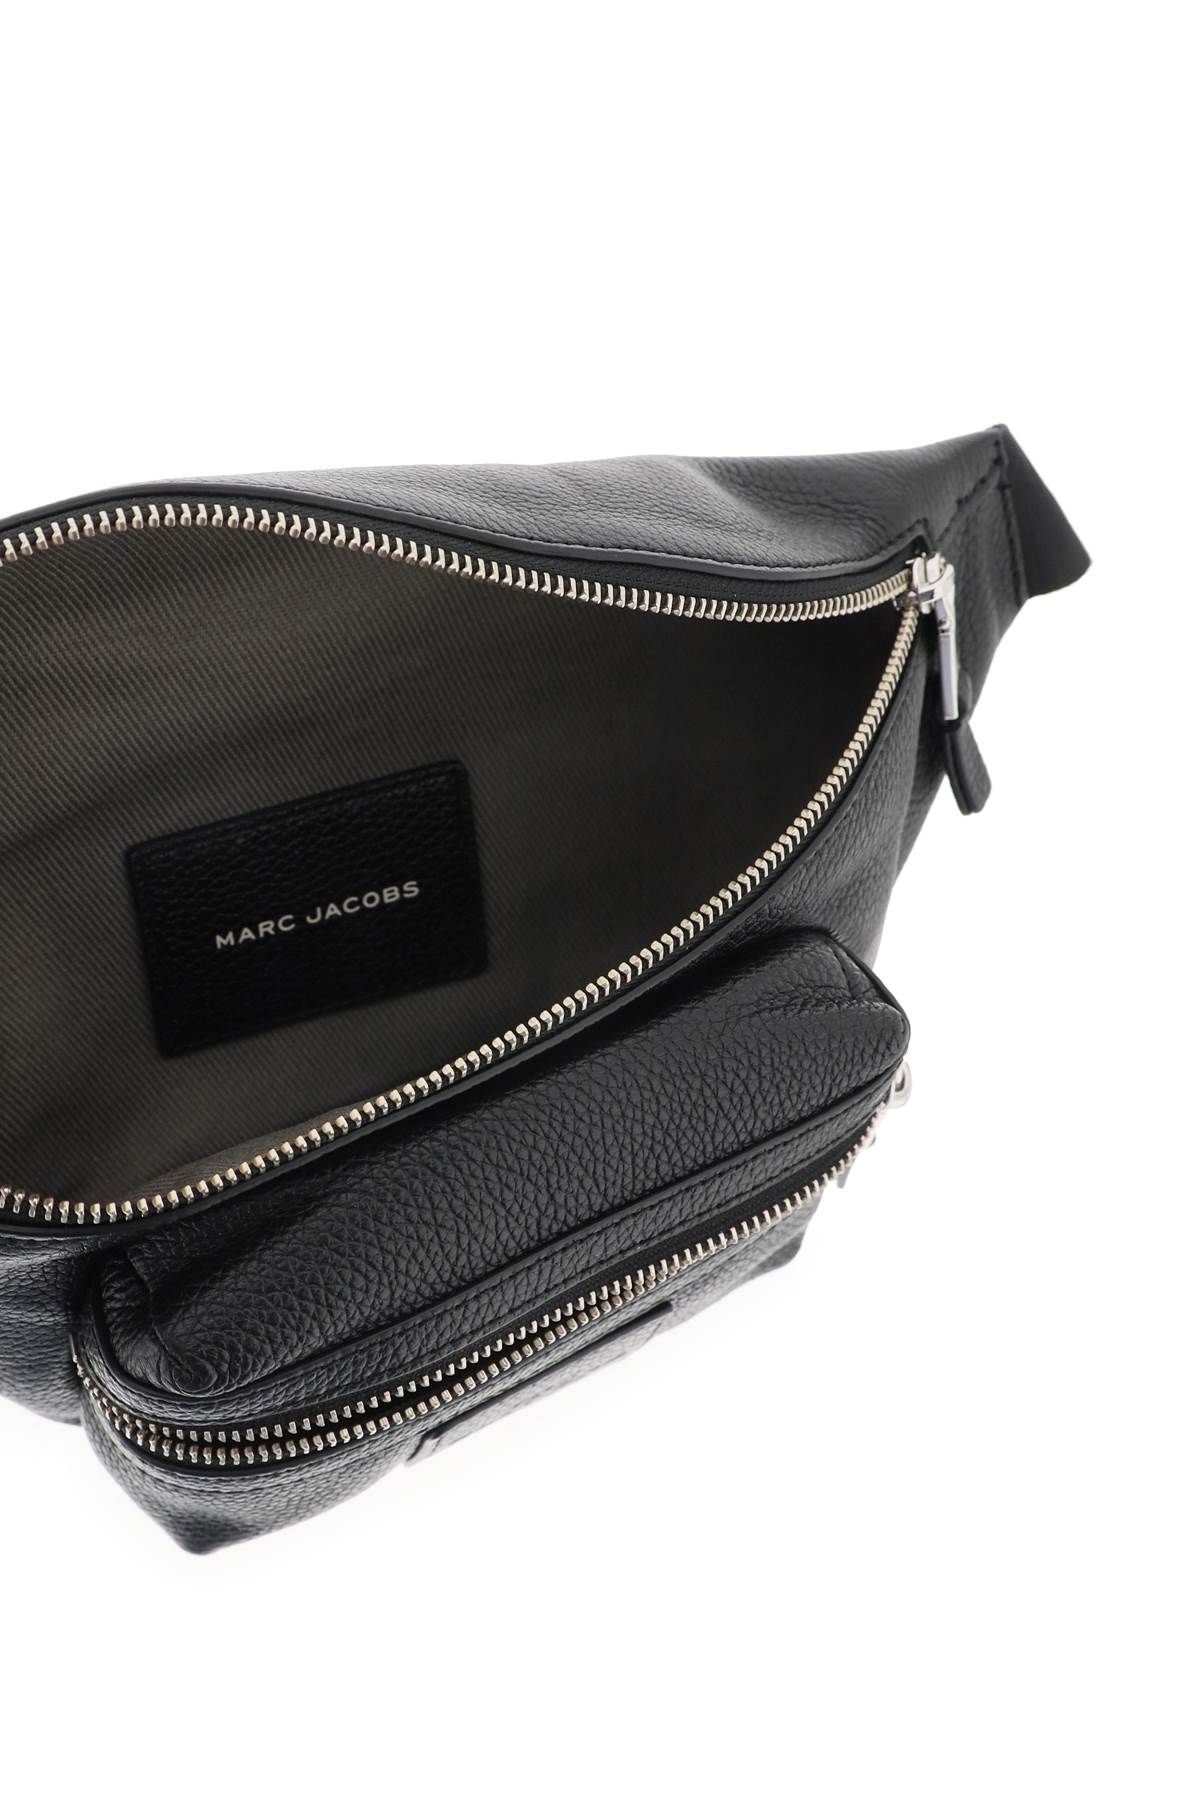 Shop Marc Jacobs Leather Belt Bag: The Perfect In Black